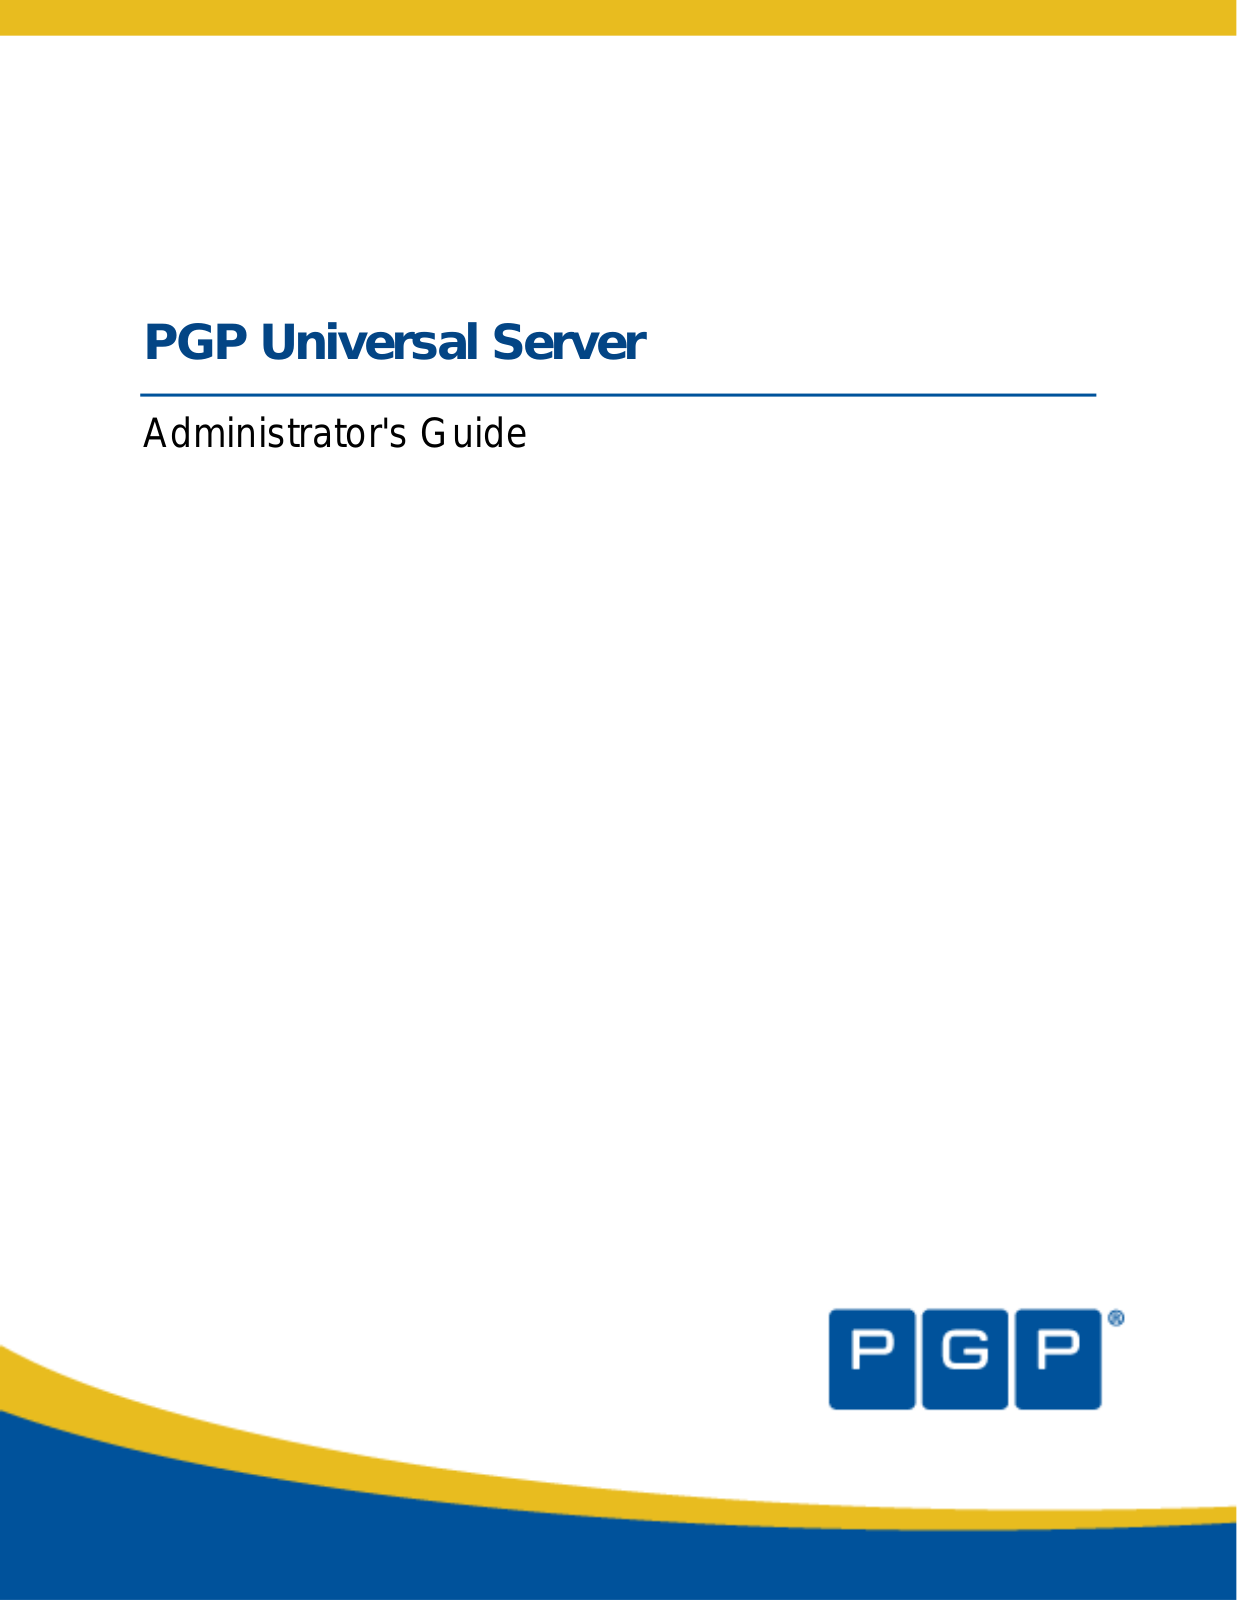 PGP Universal Server - 2.1 Administrator’s Guide